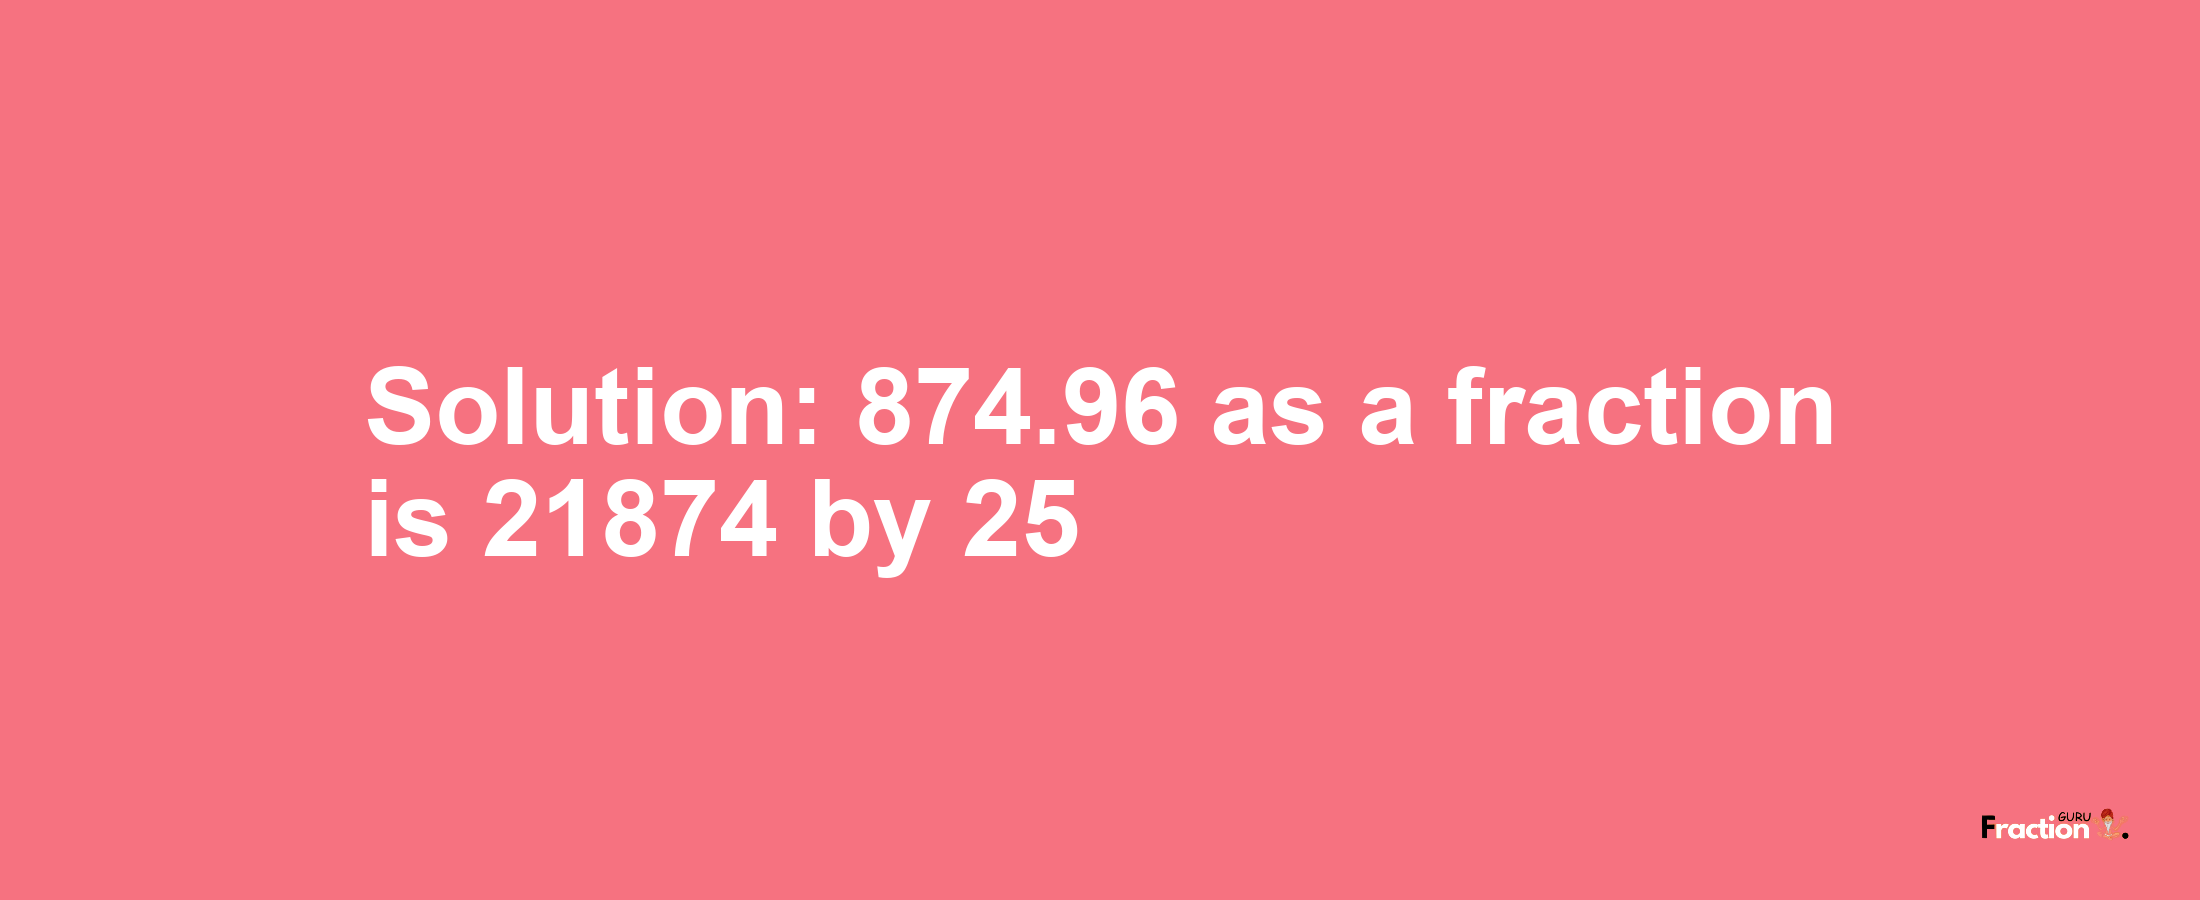 Solution:874.96 as a fraction is 21874/25